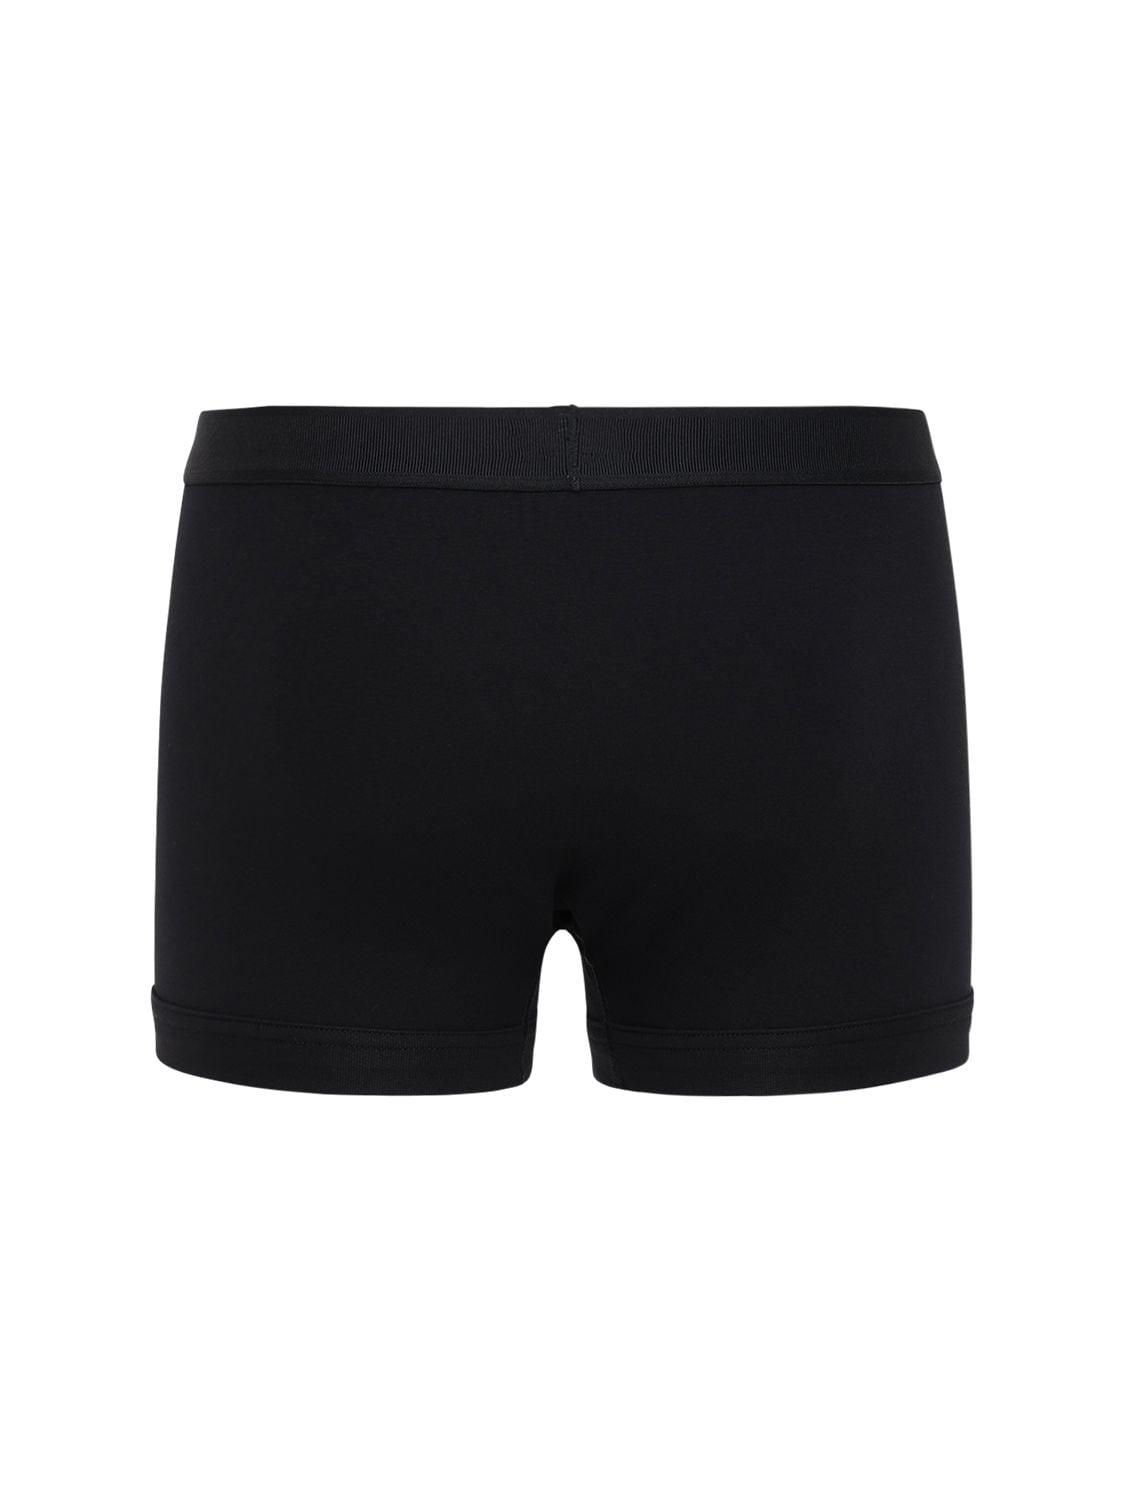 Shop Tom Ford Pack Of 2 Logo Cotton Boxer Briefs In Black